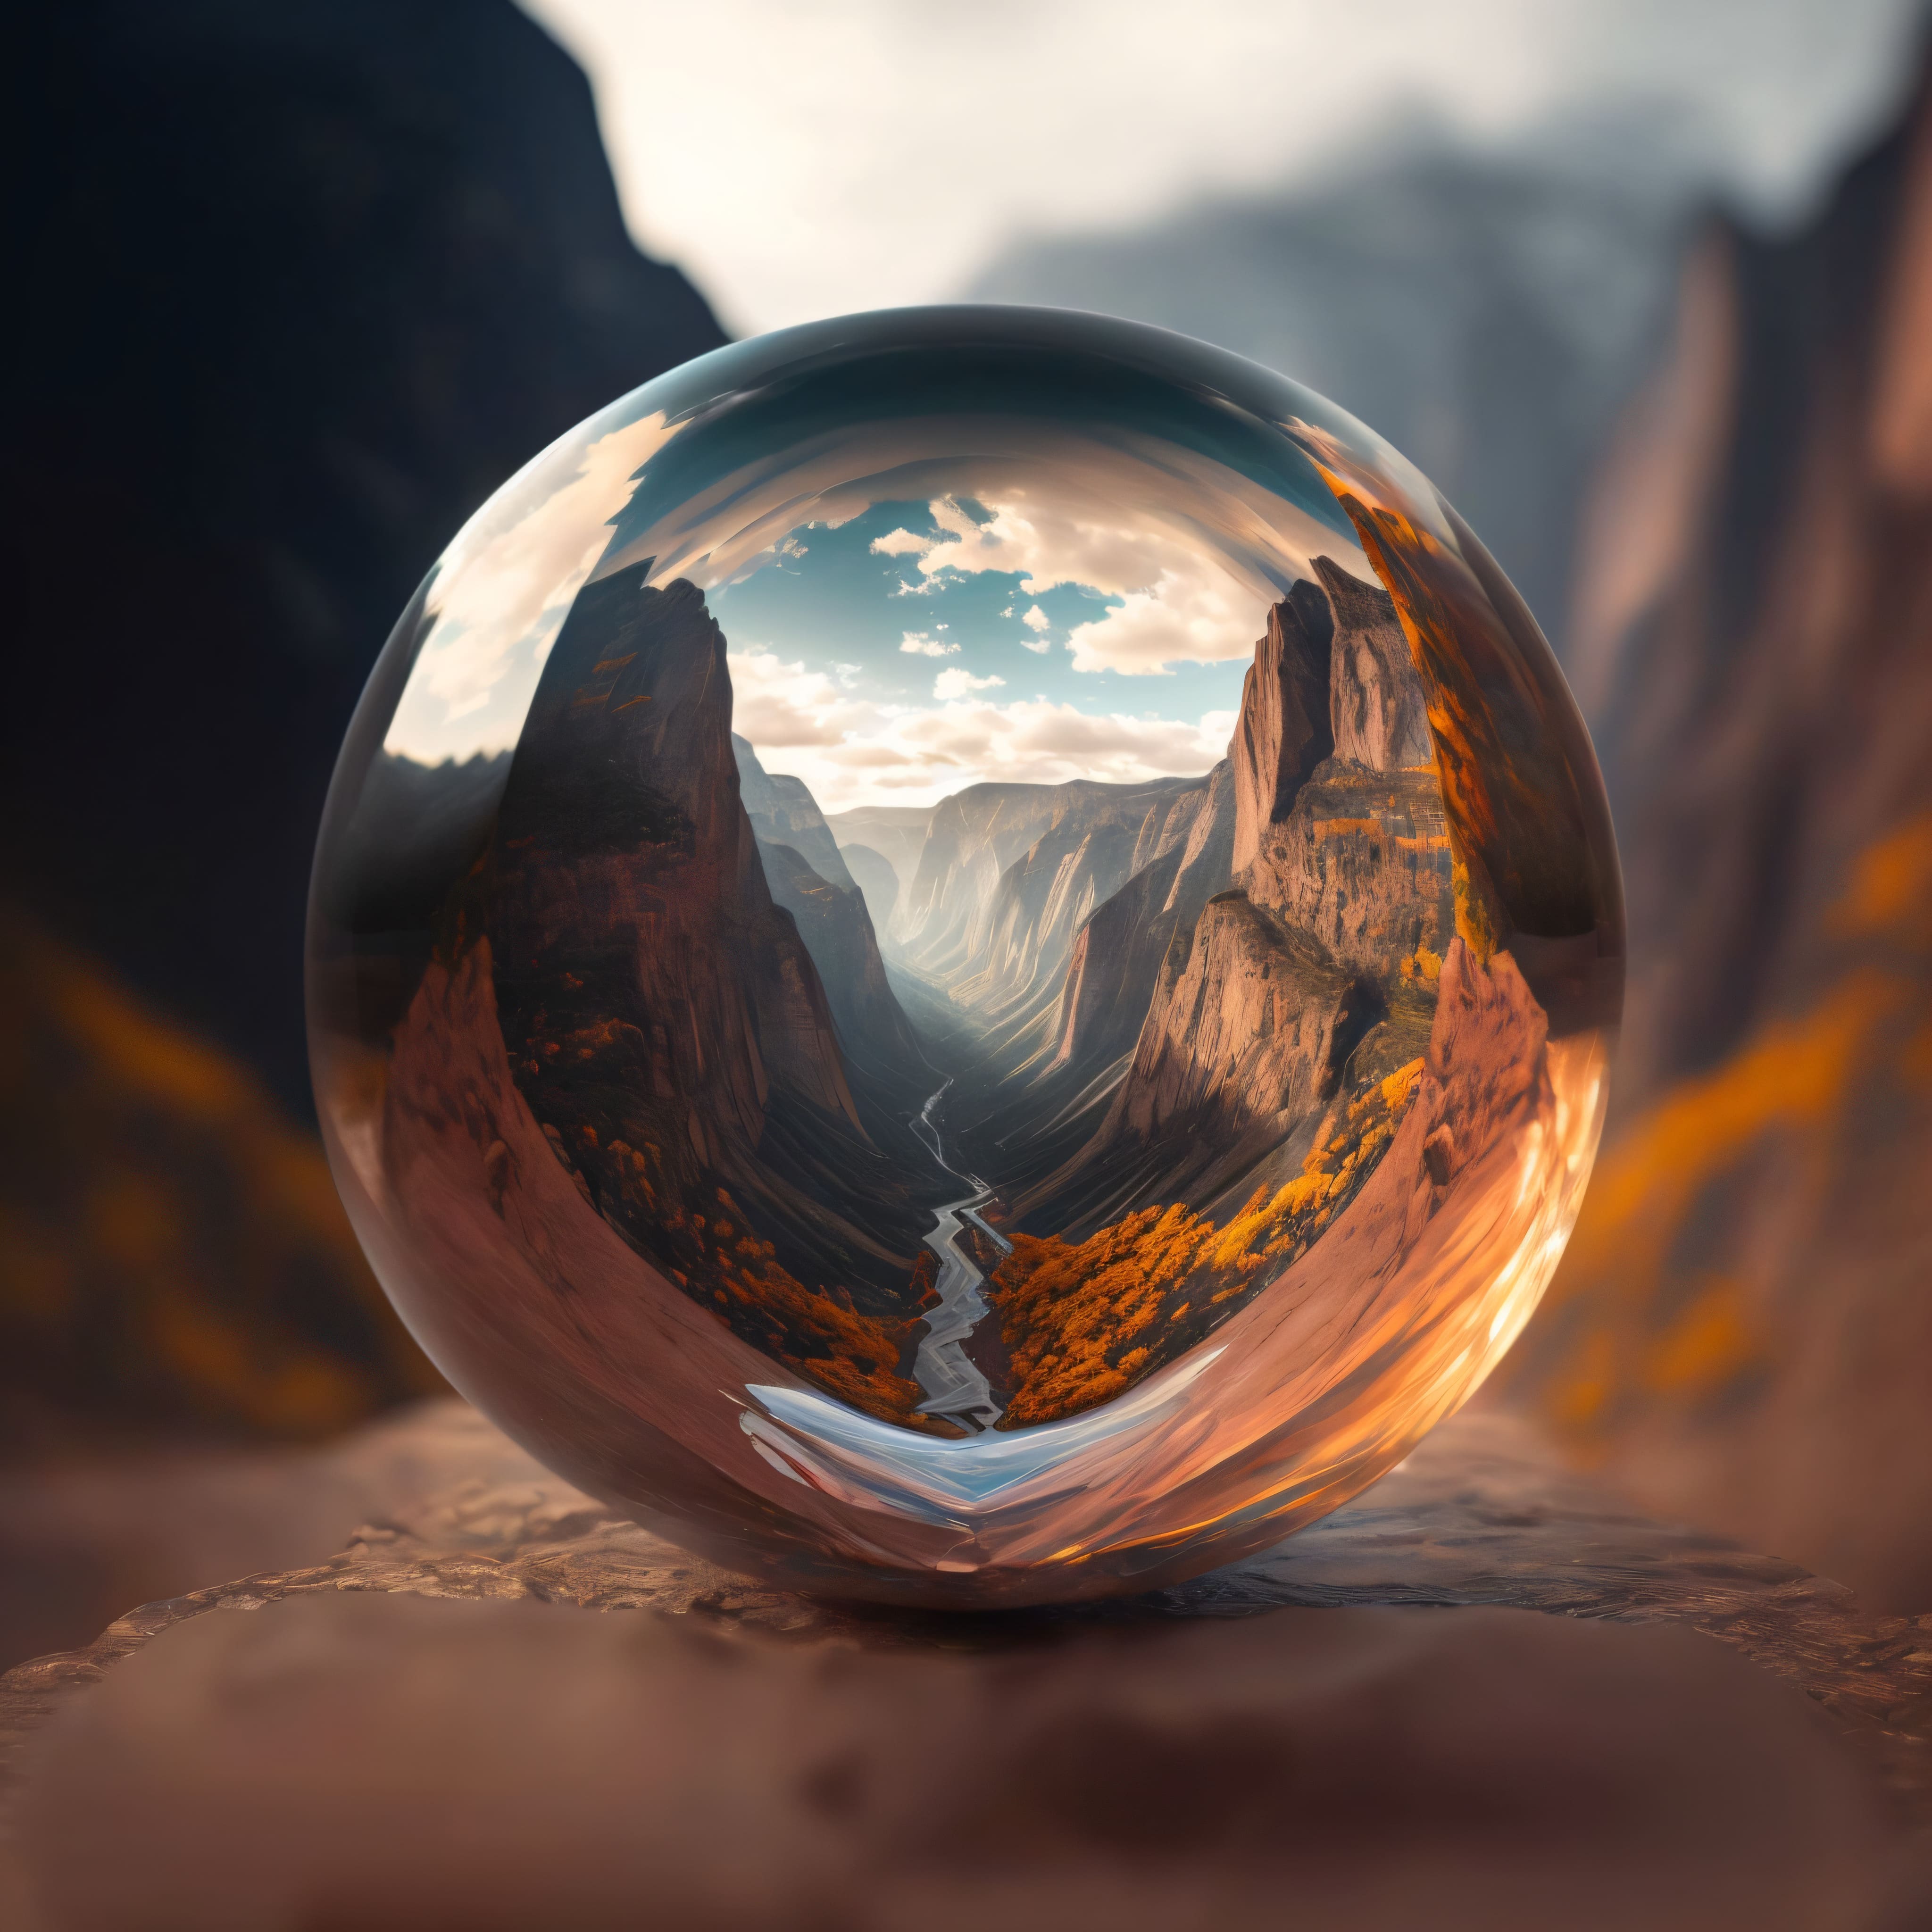 Photograph of a clear crystal ball in front of a canyon with orange rocks and a blue river running through it.